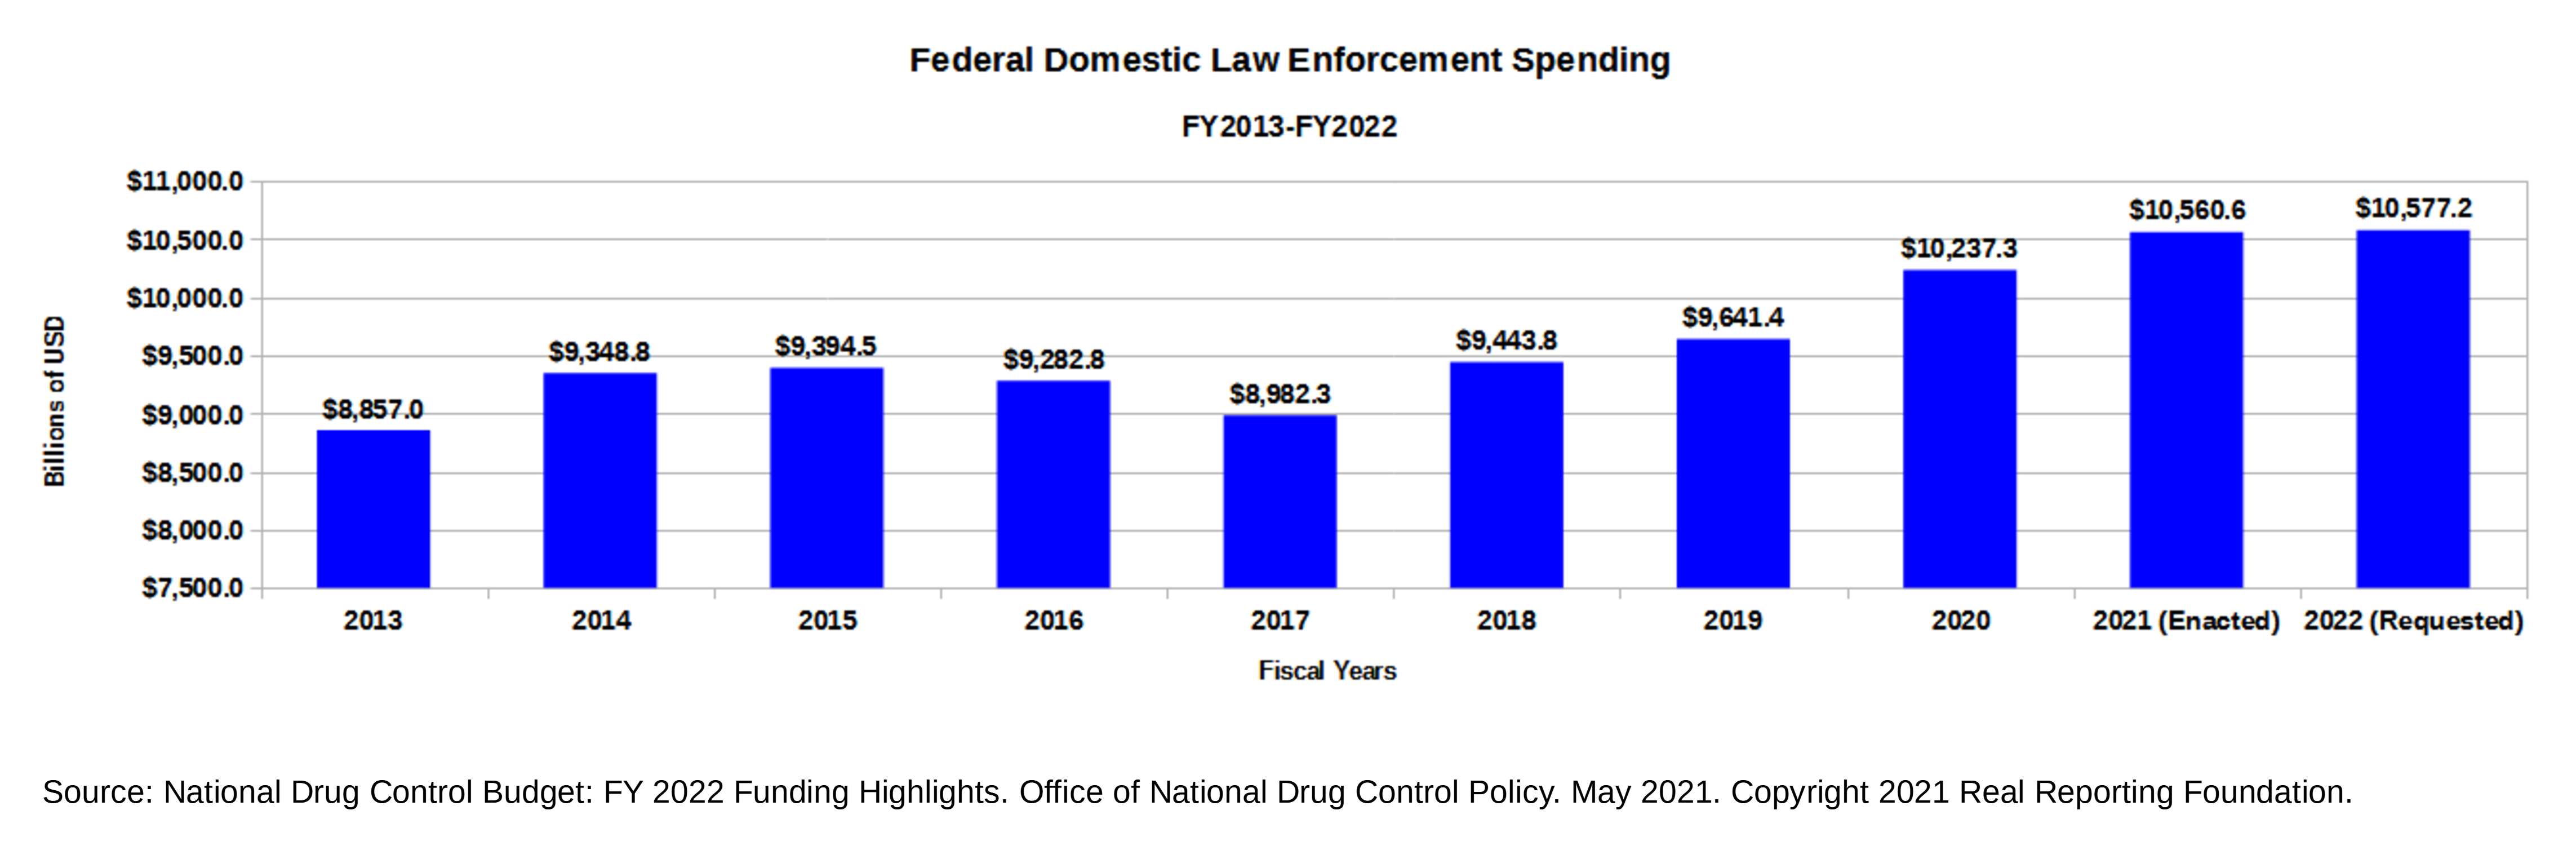 bar graph showing federal drug control spending on domestic law enforcement from FY2013 through FY2022